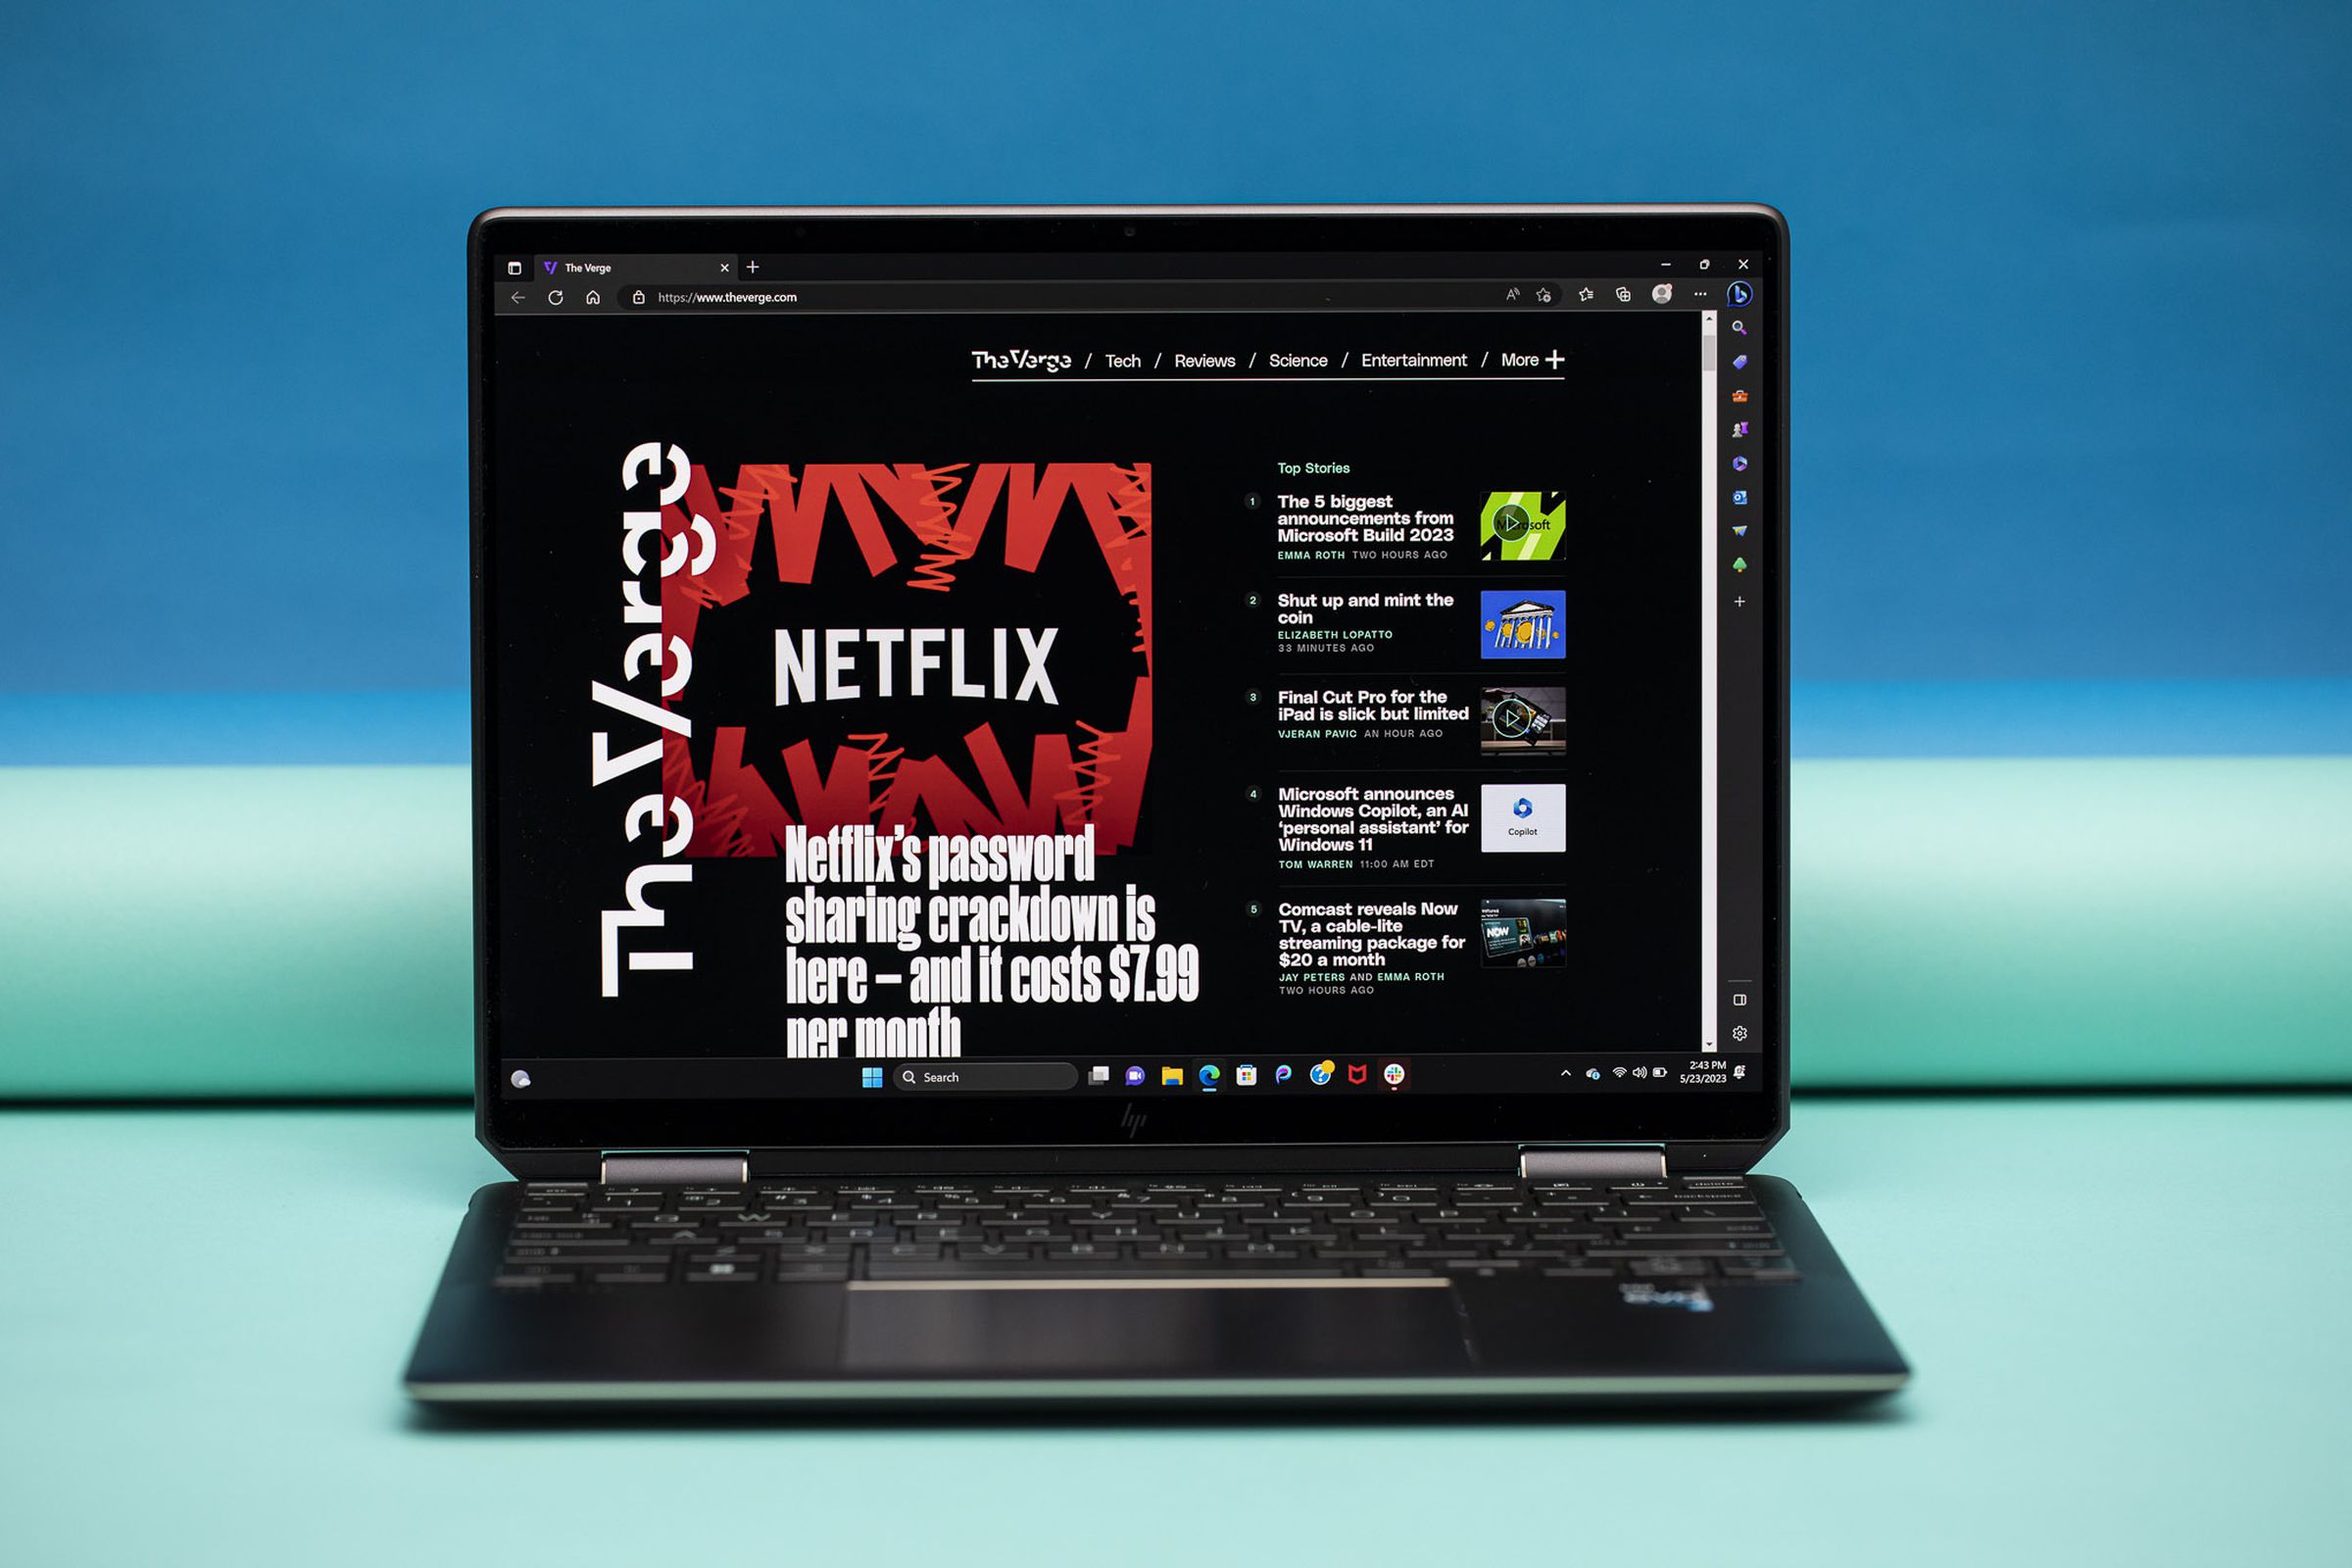 Best Laptop 2023: The HP Spectre x360 13.5 displaying The Verge homepage.